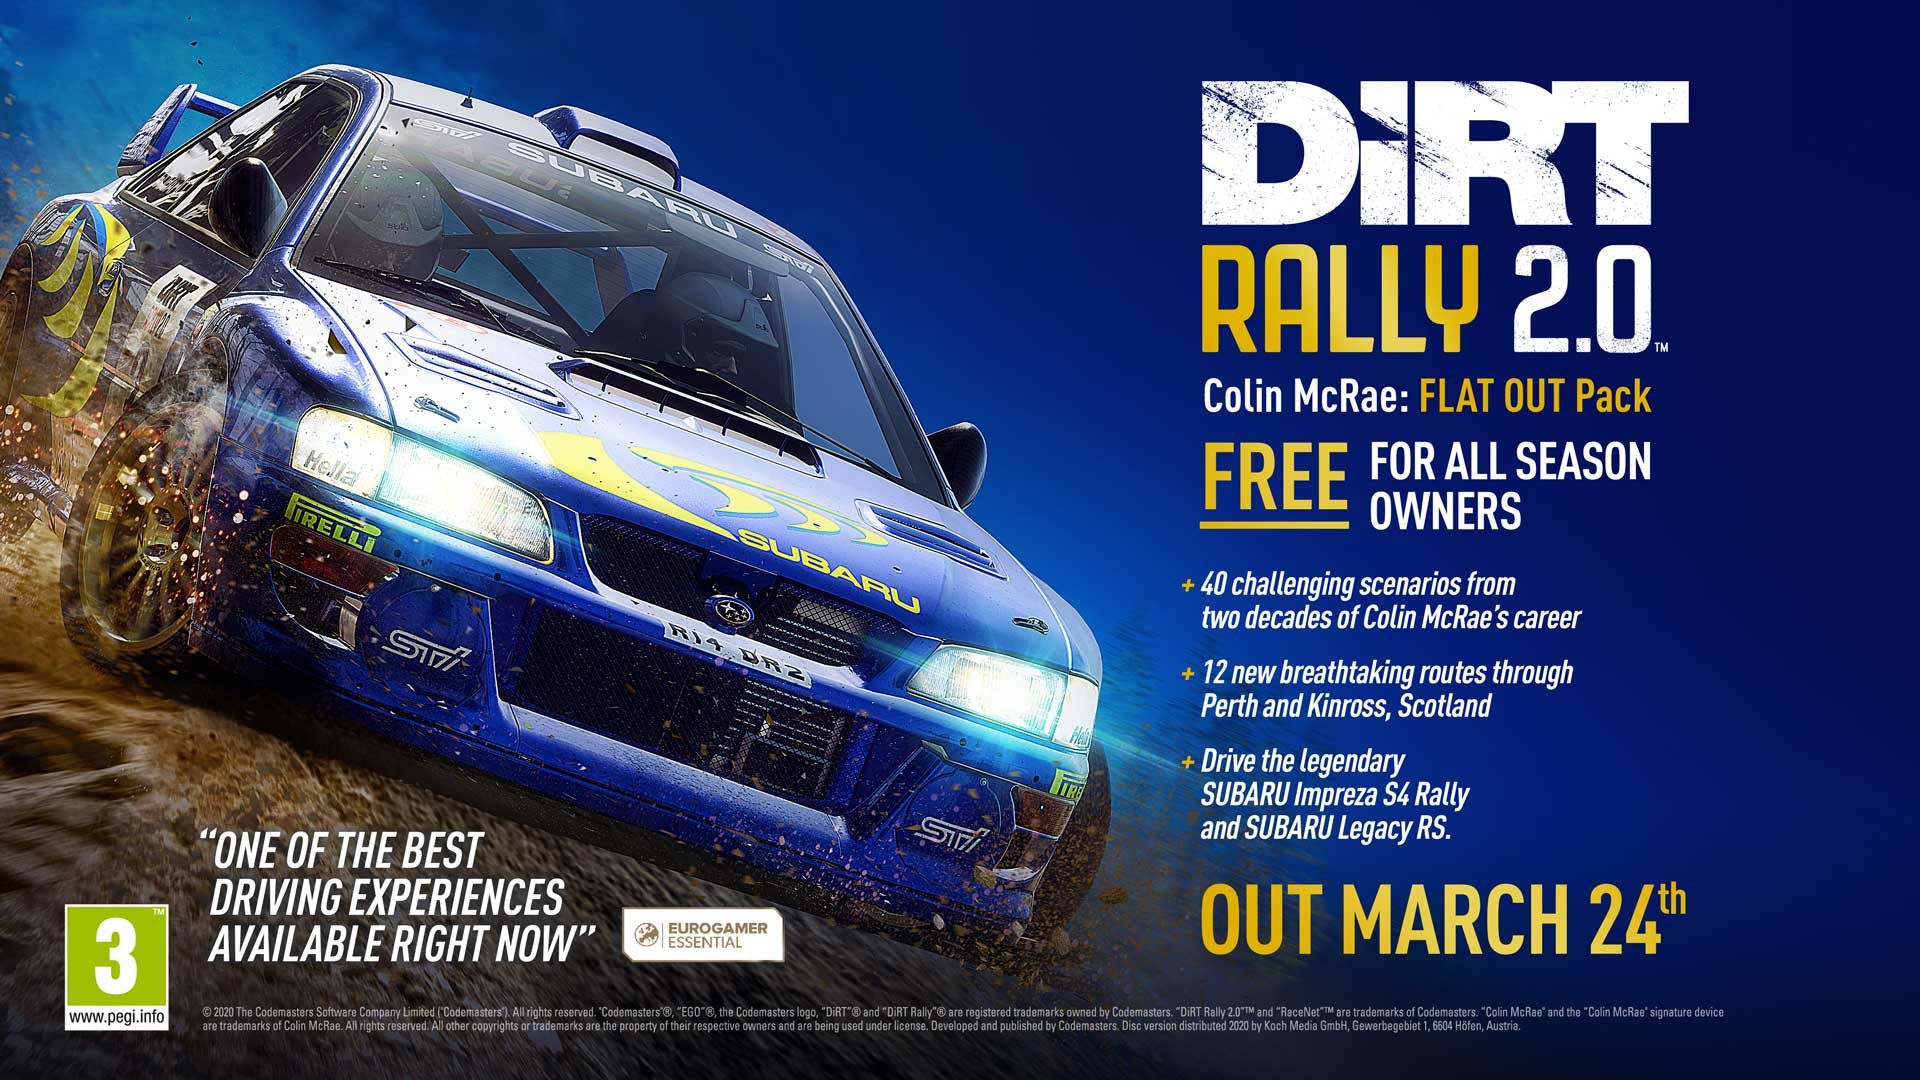 More information about "DiRT Rally 2.0: in arrivo il Colin McRae FLAT OUT Pack"